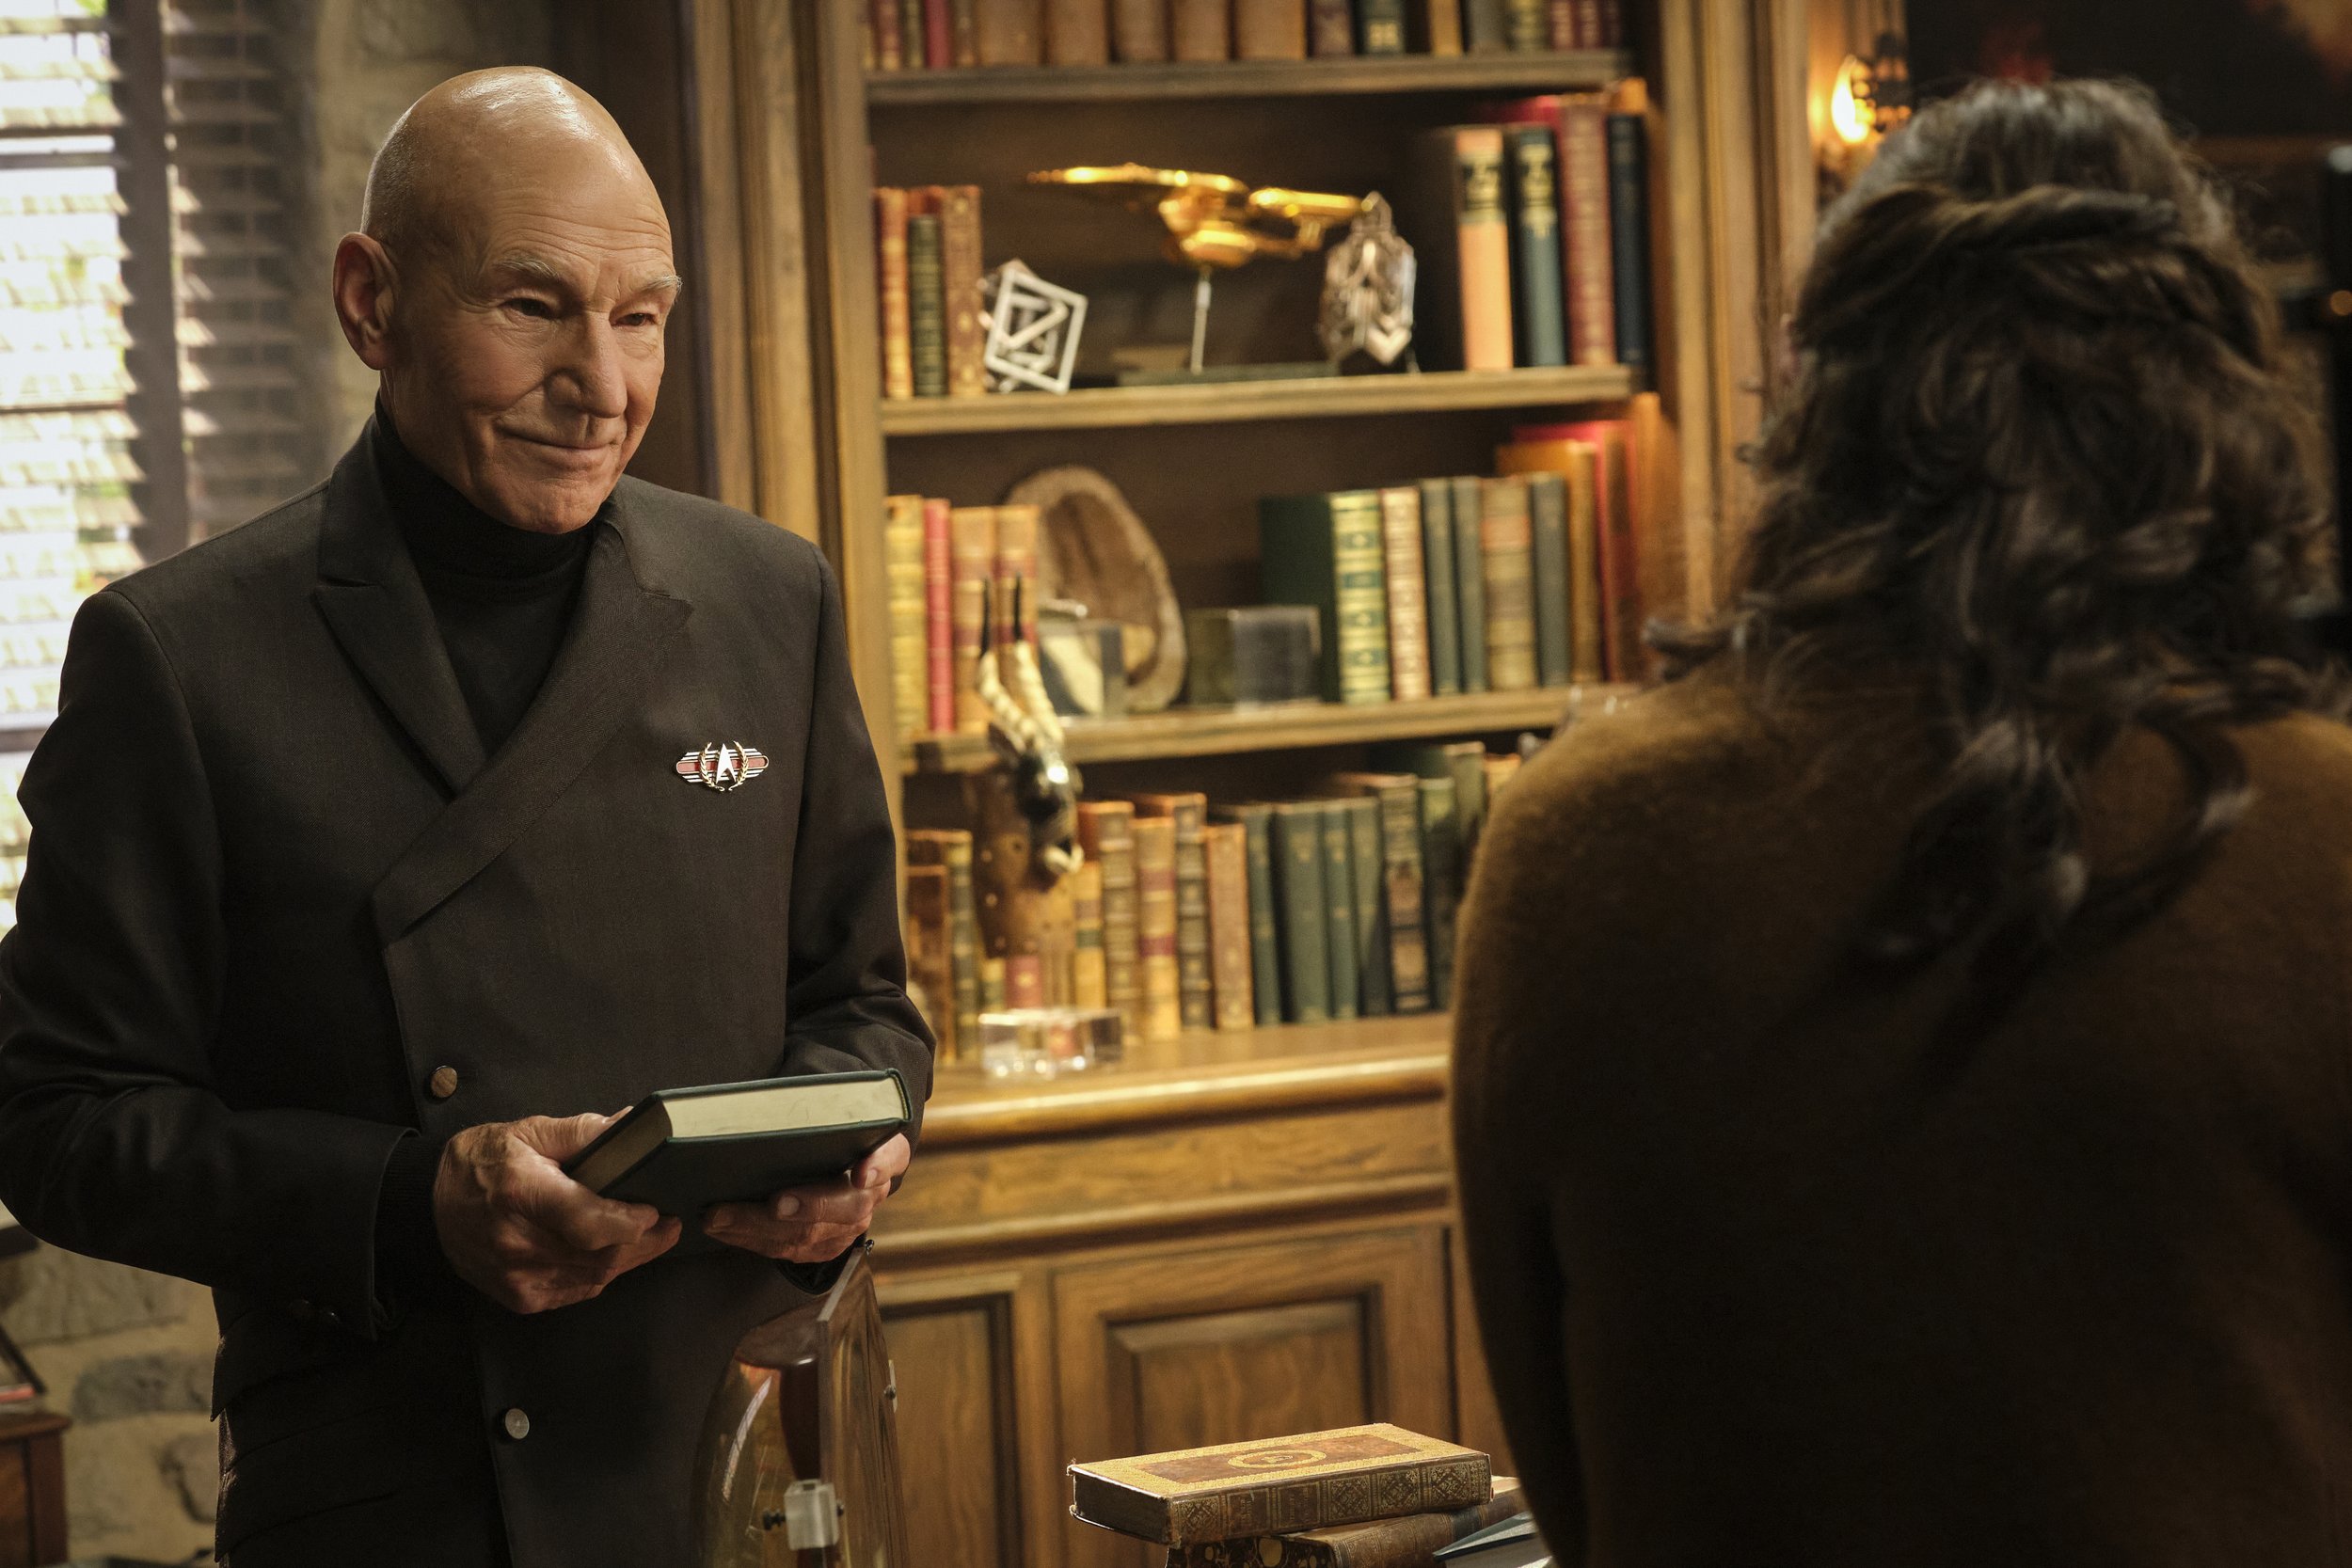   Pictured: Sir Patrick Stewart as Jean-Luc Picard of the Paramount+ original series STAR TREK: PICARD. Photo Cr: Trae Patton/Paramount+ (C)2022 ViacomCBS. All Rights Reserved.  